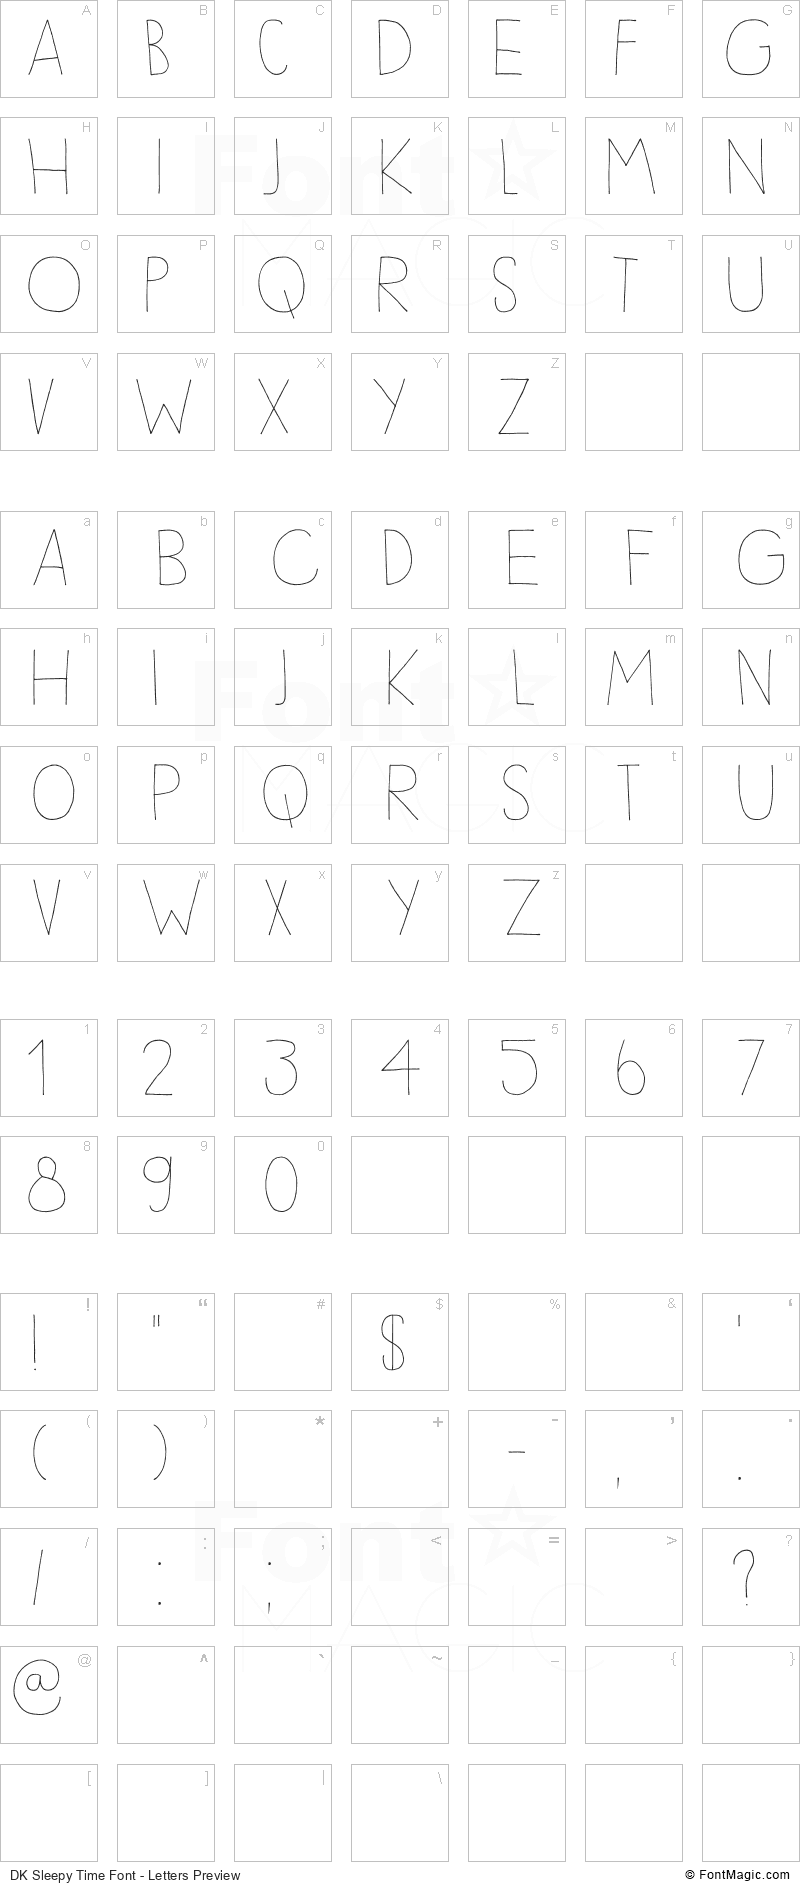 DK Sleepy Time Font - All Latters Preview Chart